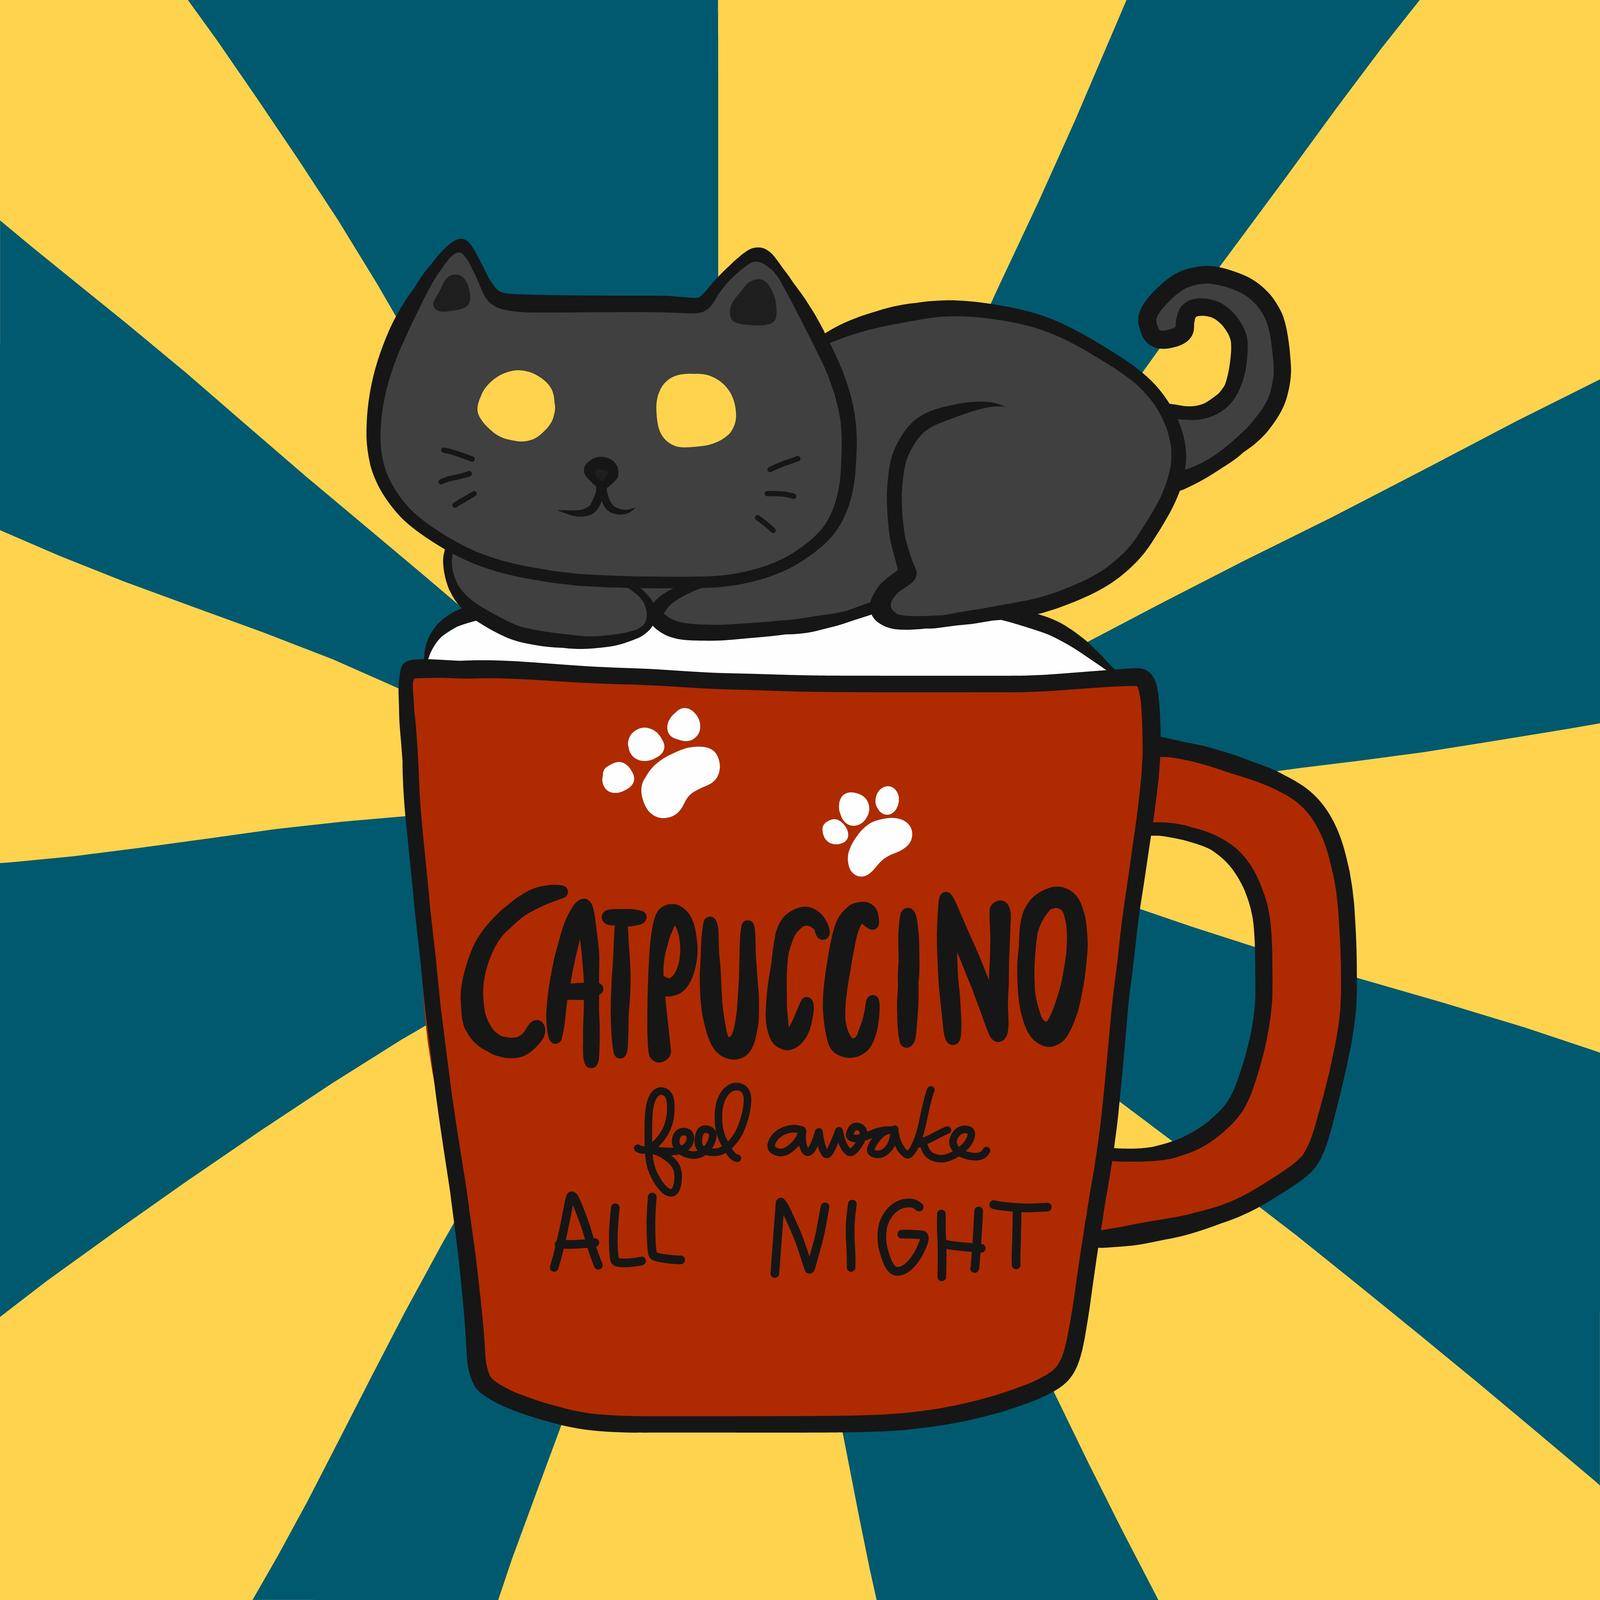 Catpuccino feel awake all night (Black cat on cappuccino coffee cup cartoon vector illustration by Yoopho